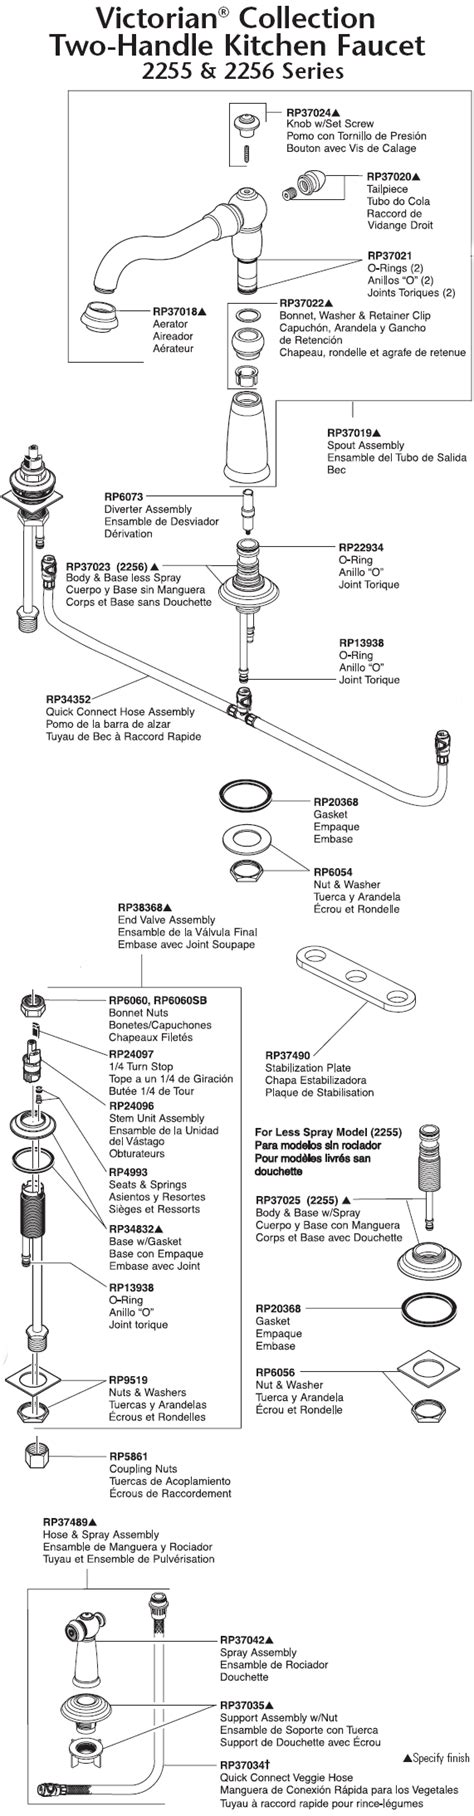 All parts of a kingston brass faucet are warranted to the original retail purchaser to be free from defects in material and workmanship for a the same parts diagram is printed as a part of installation instructions, again without the legend. PlumbingWarehouse.com - Delta Kitchen Faucet Parts For Model 2155, 2255, 2256